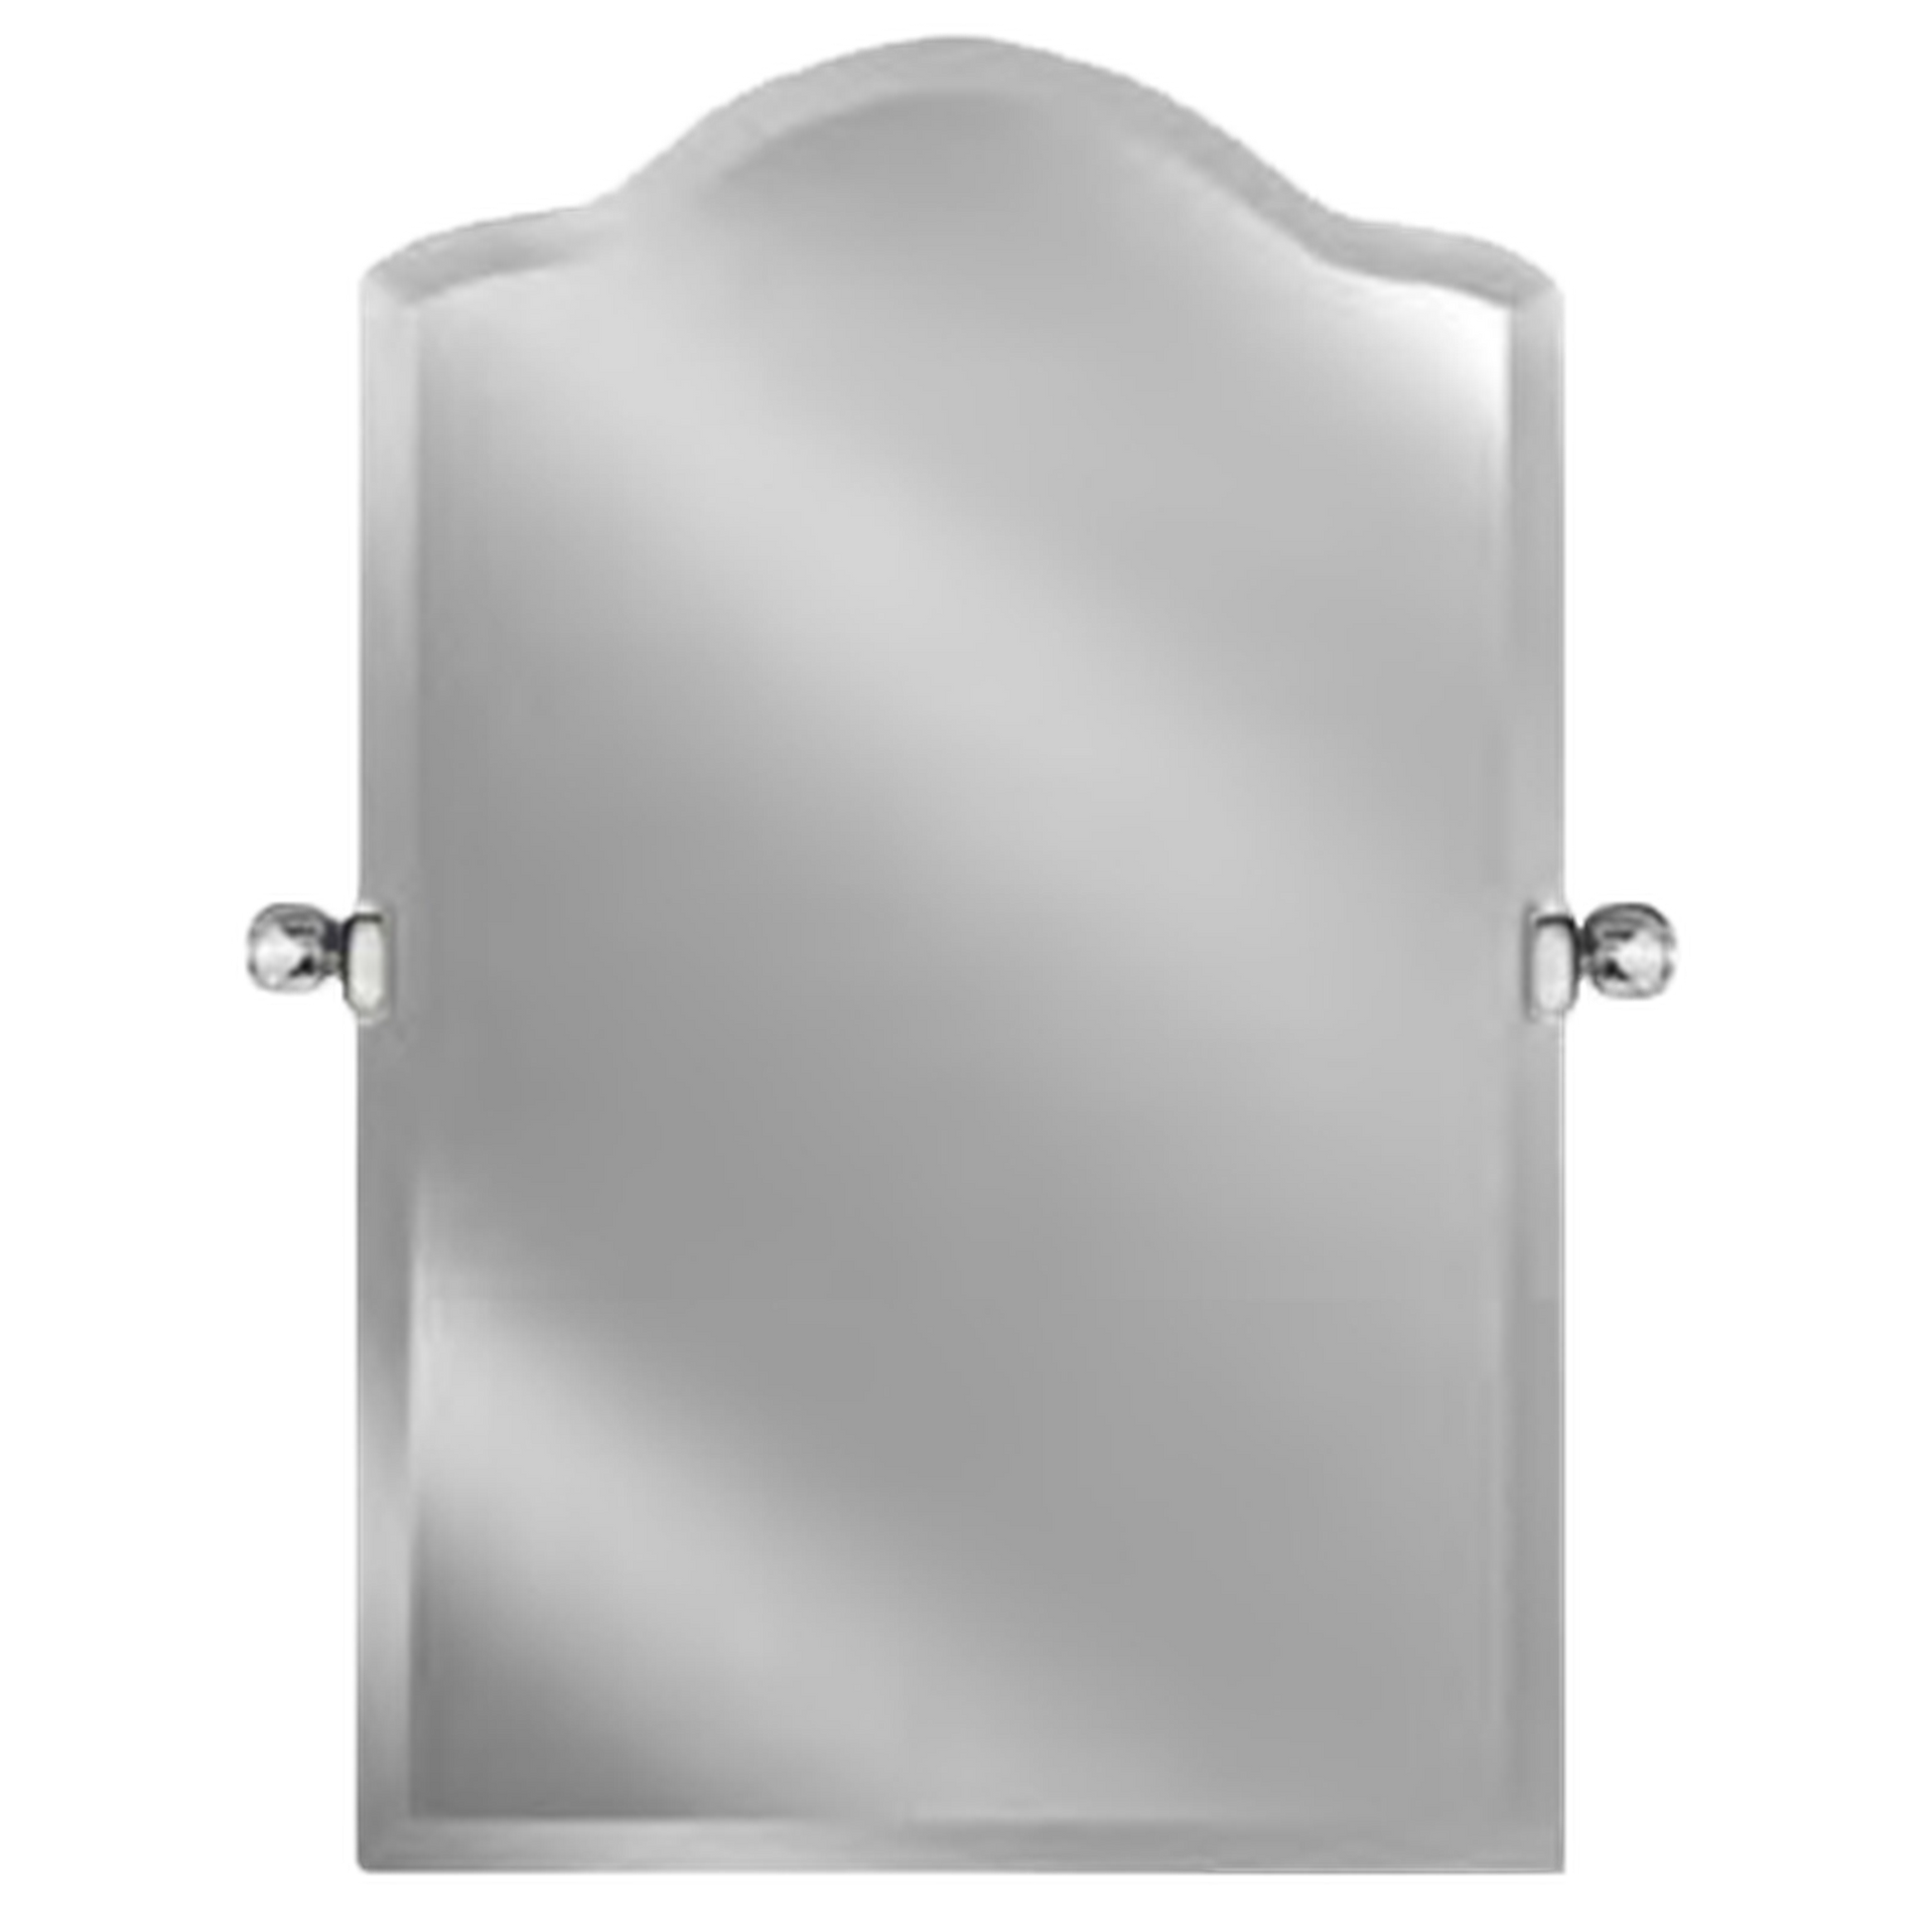 Afina Radiance 24" x 35" Scallop Top Frameless Beveled Wall Mirror With Polished Chrome Contemporary Tilt Bracket